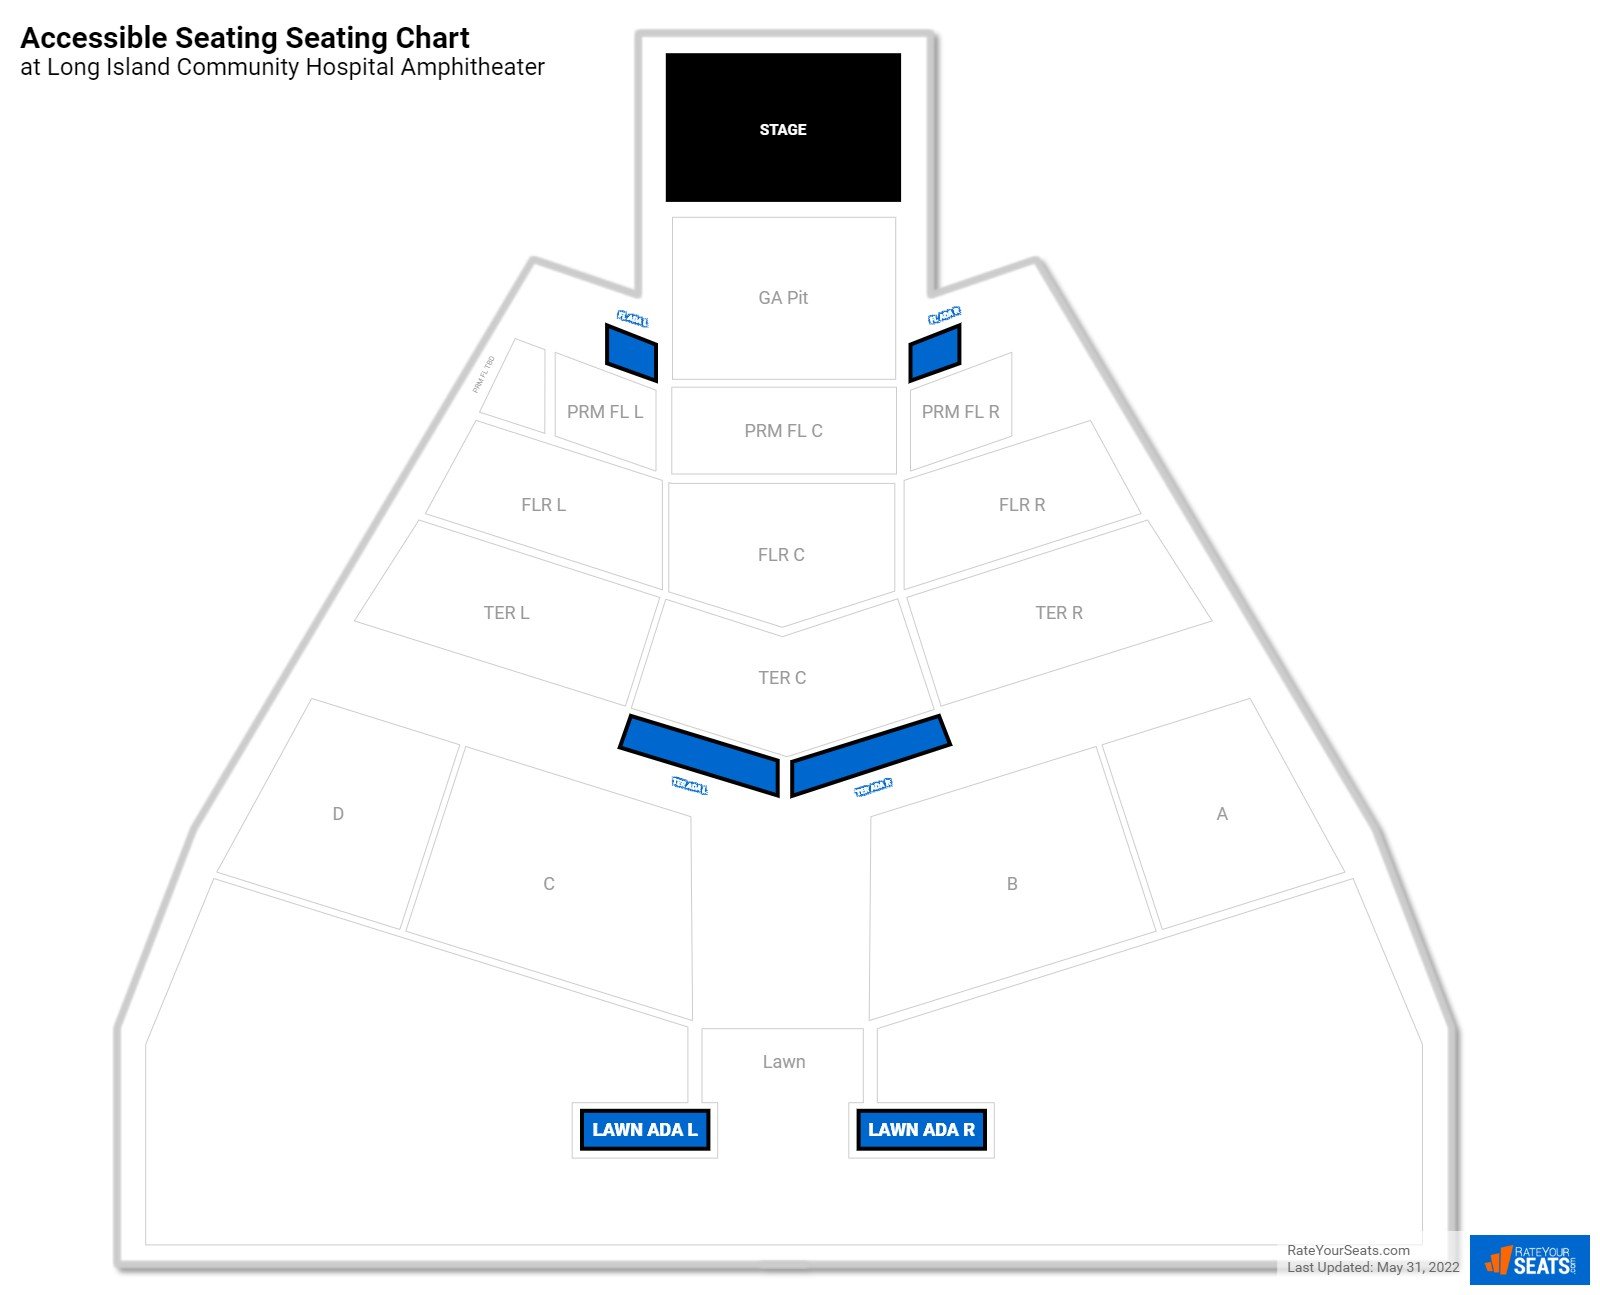 Concert Accessible Seating Seating Chart at Amphitheater at Bald Hill